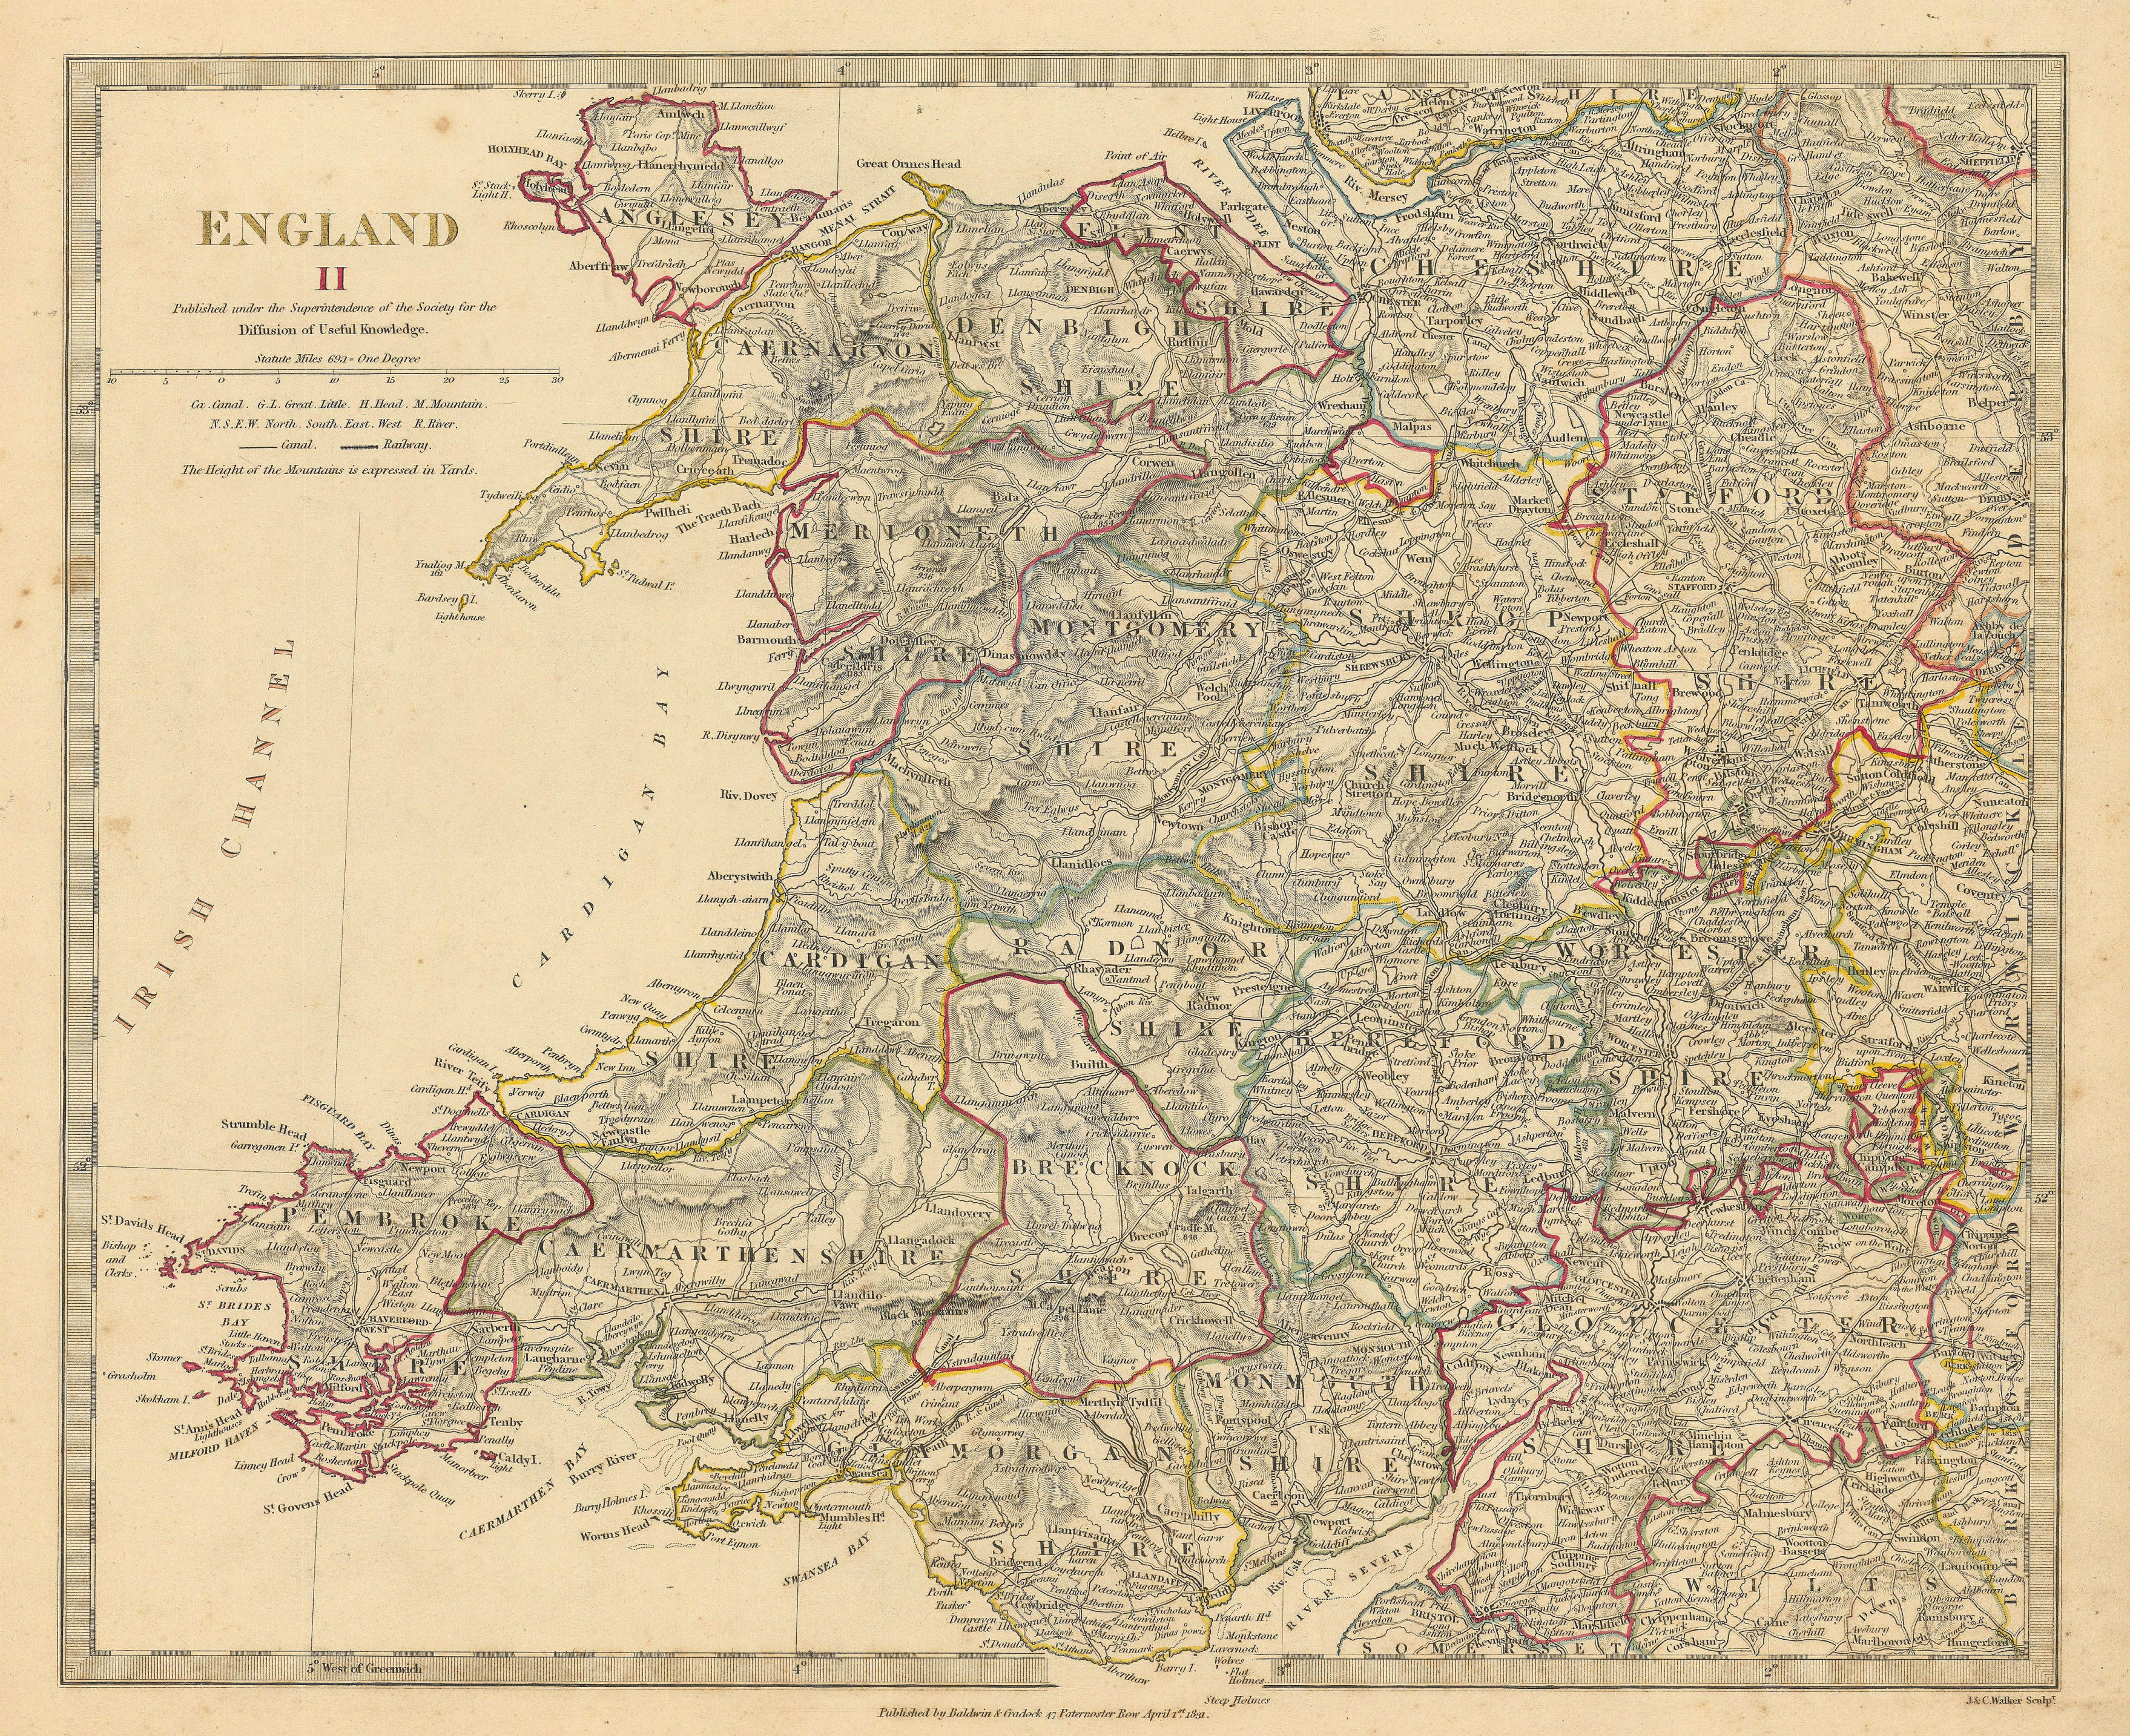 WALES & ENGLAND WEST MIDLANDS. Showing counties. Original colour.SDUK 1844 map